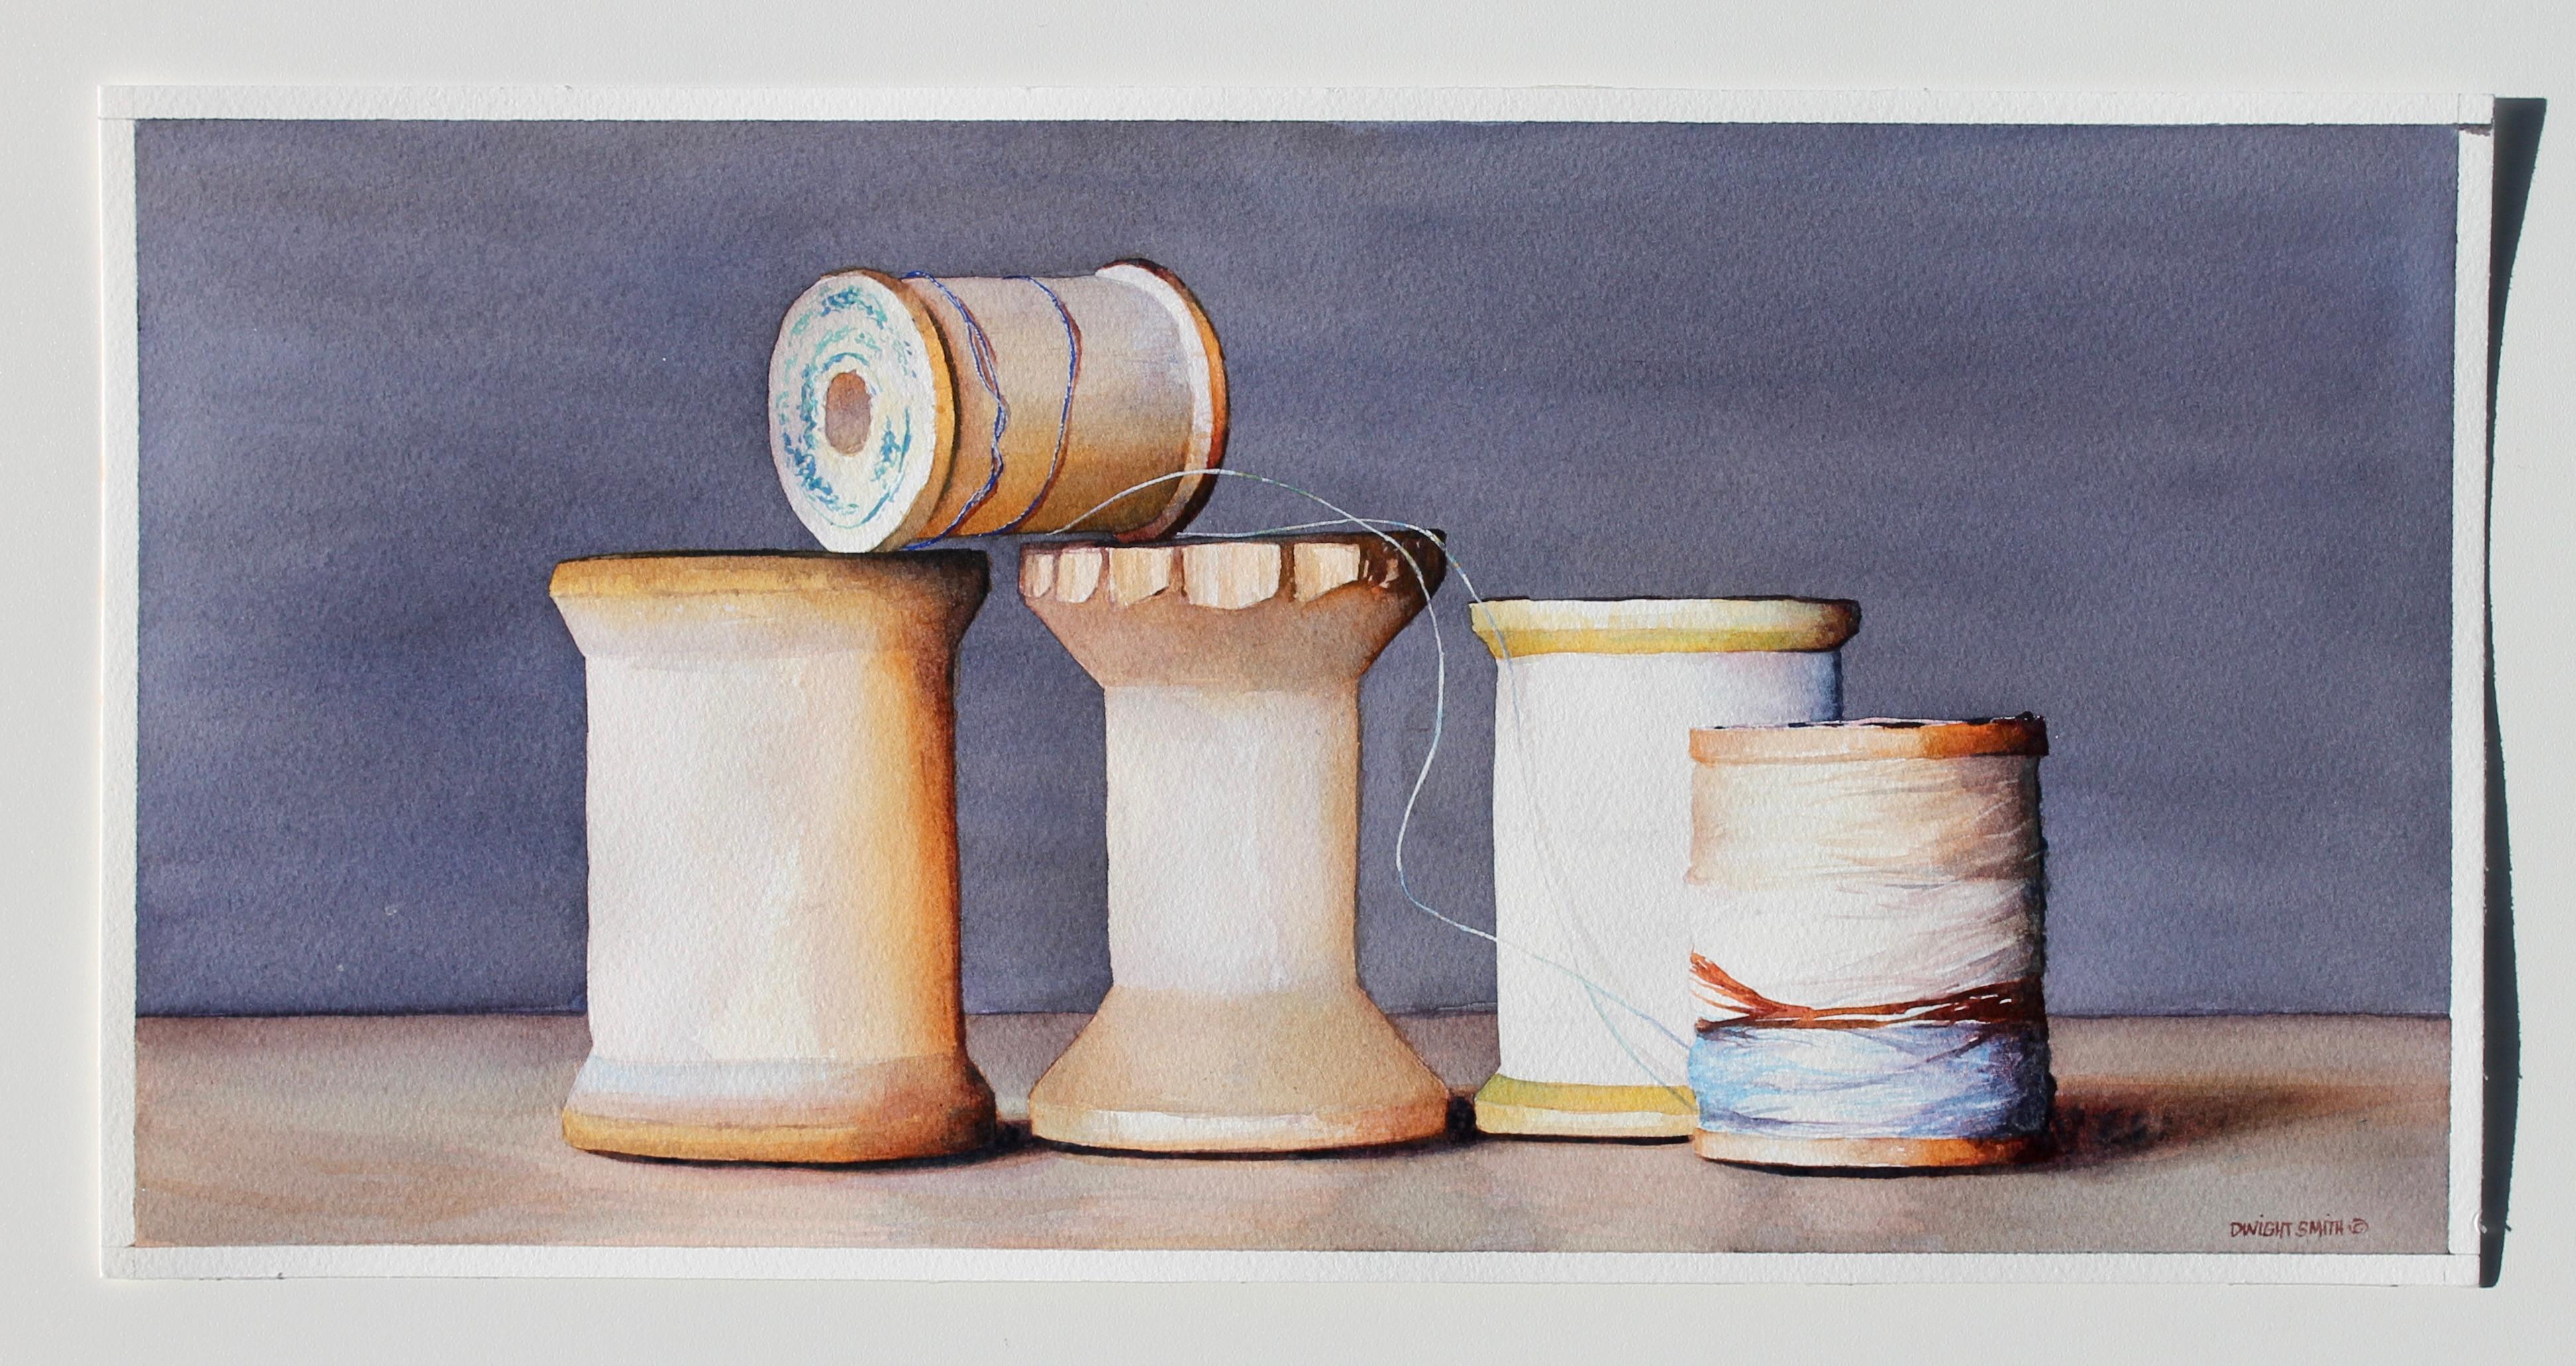 <p>Artist Comments<br>Wooden spools convey a natural landscape reminiscent of towering cliffs. Hues of blue threads form a vista mimicking rain pouring down on dry land. The interplay of light and shadow against the table and the backdrop of a gray